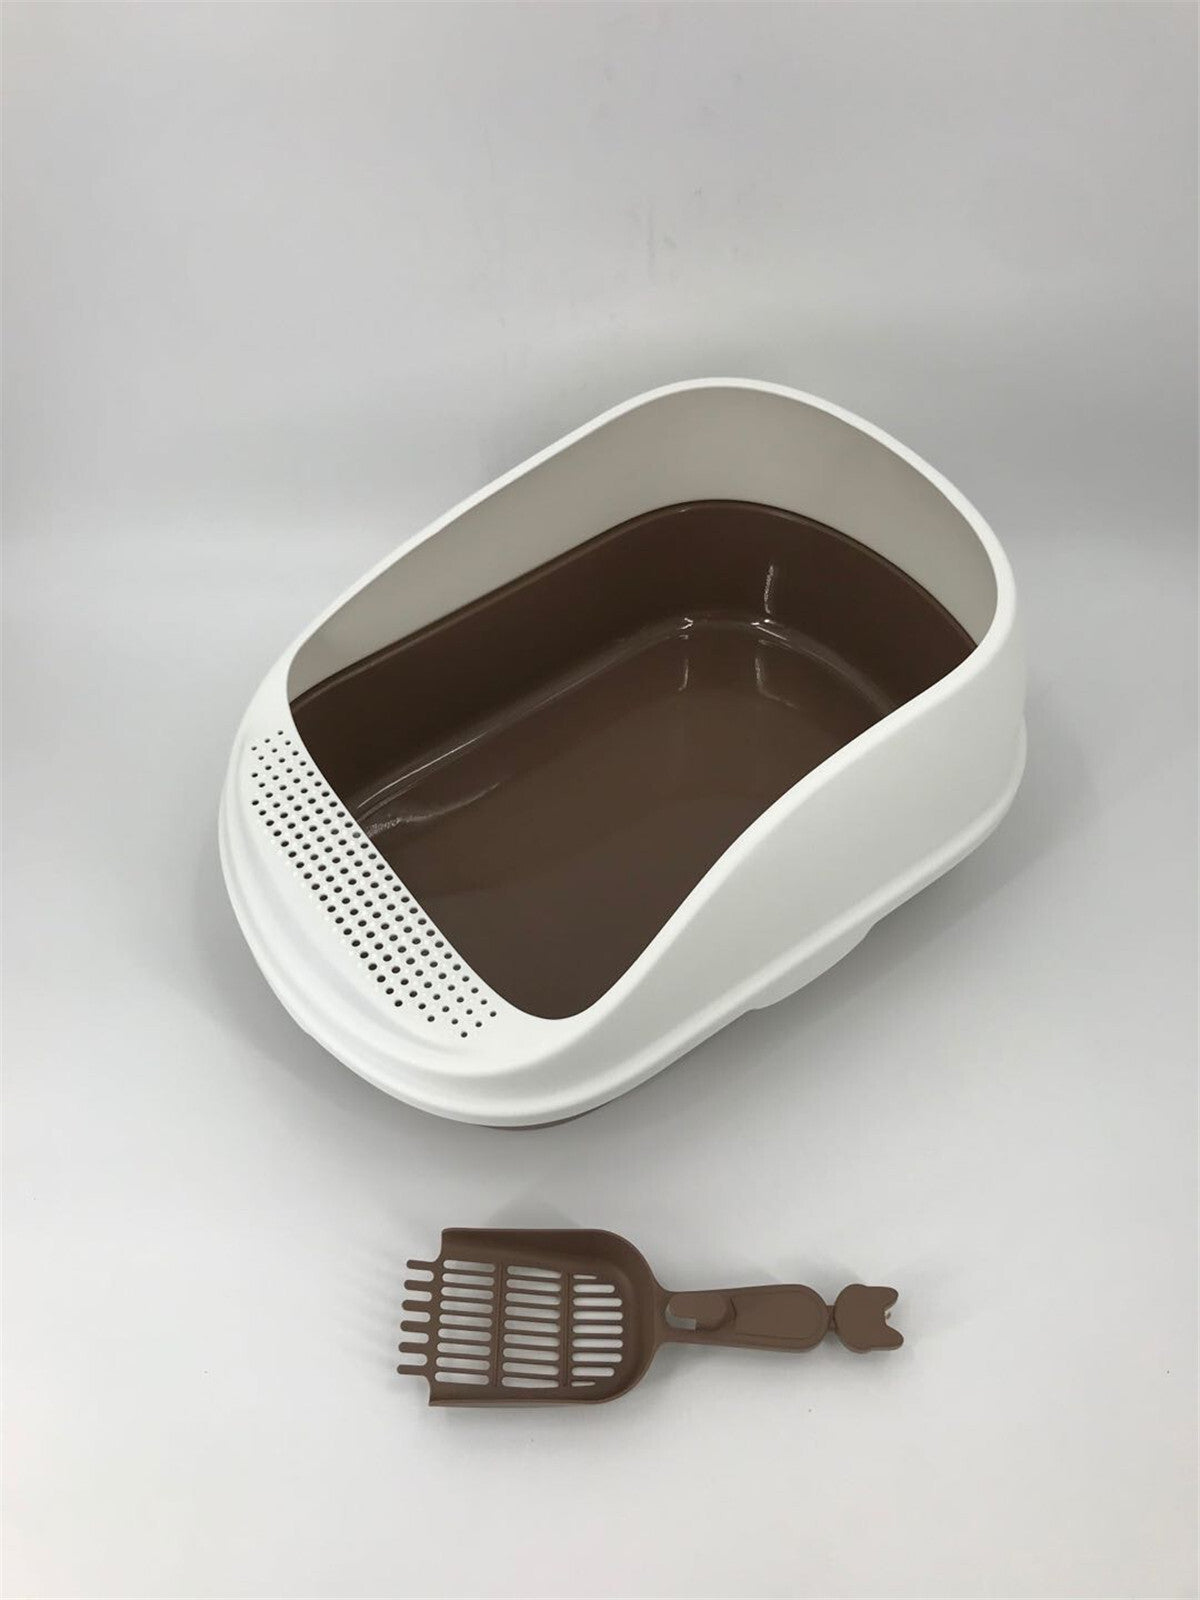 YES4PETS Large Deep Portable Cat Toilet Litter Box Tray with Scoop Brown